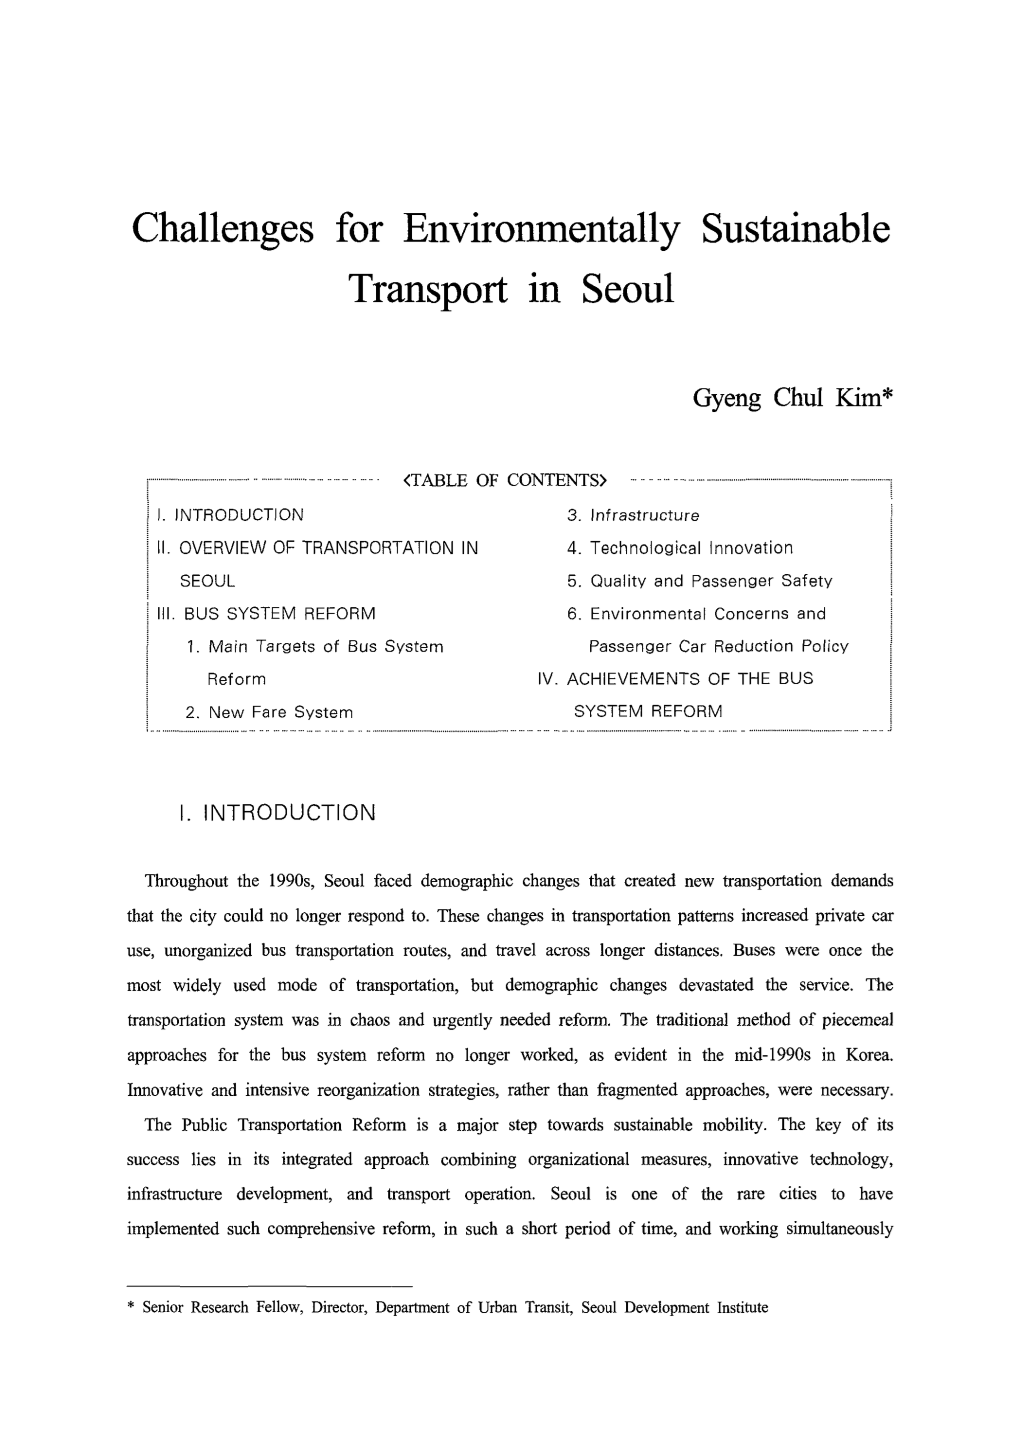 Challenges for Environmentally Sustainable Transport in Seoul